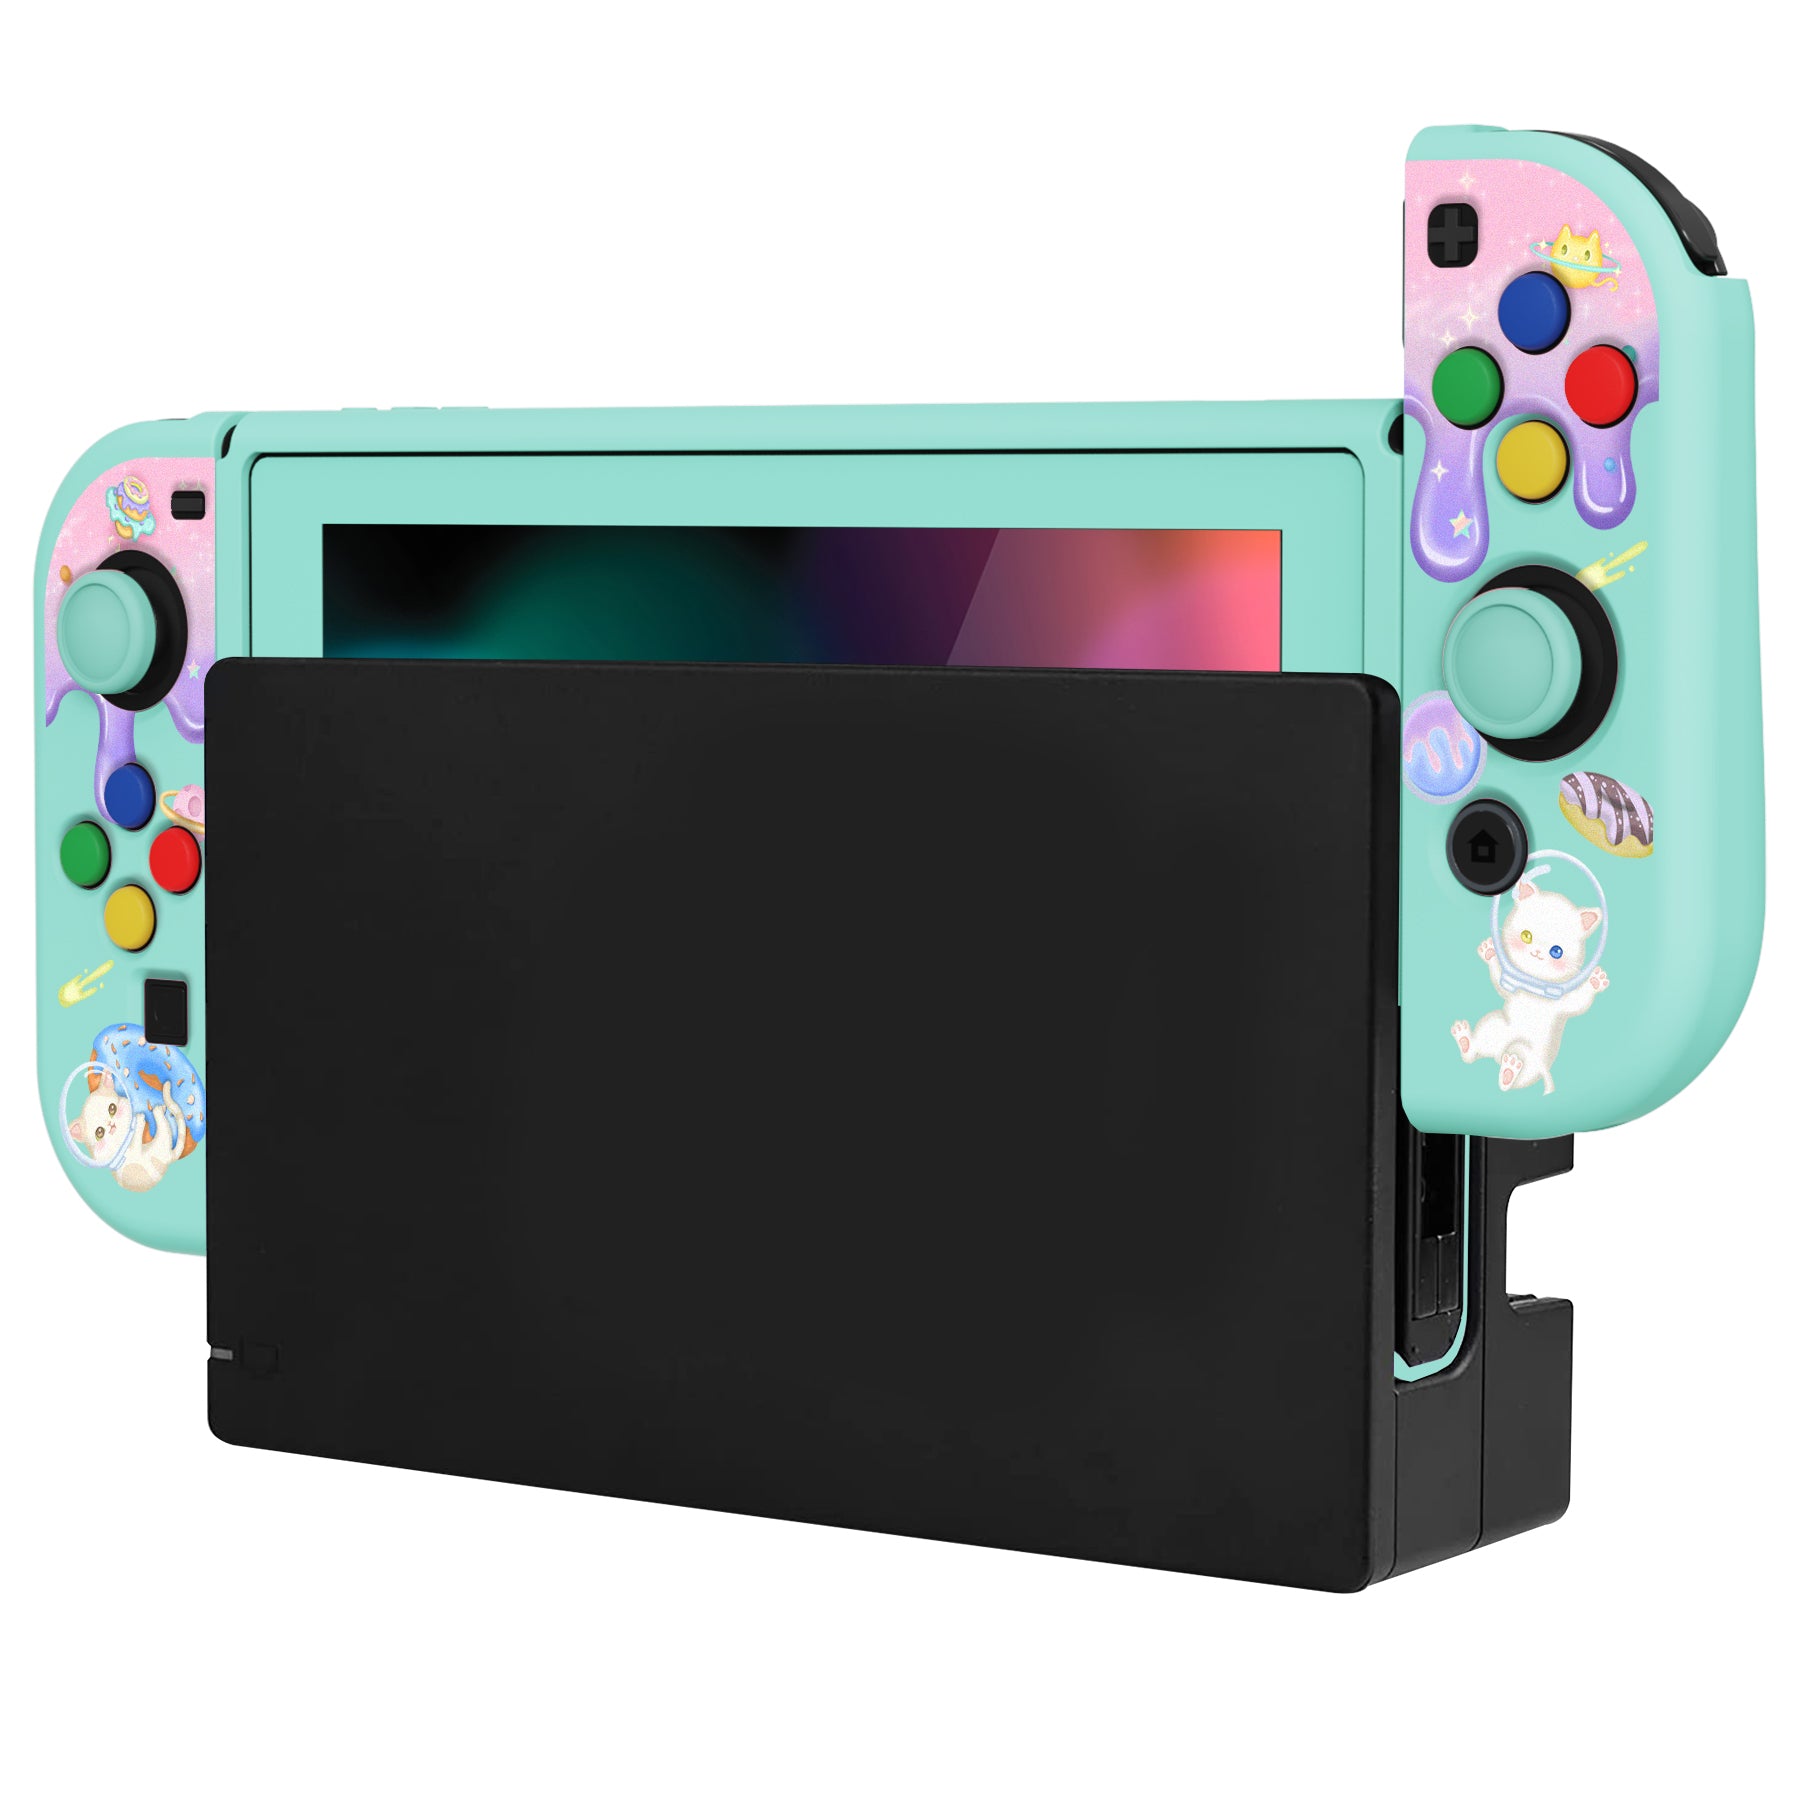 PlayVital ZealProtect Soft Protective Case for Nintendo Switch, Flexible Cover for Switch with Tempered Glass Screen Protector & Thumb Grips & ABXY Direction Button Caps - Donut Odyssey - RNSYV6013 playvital